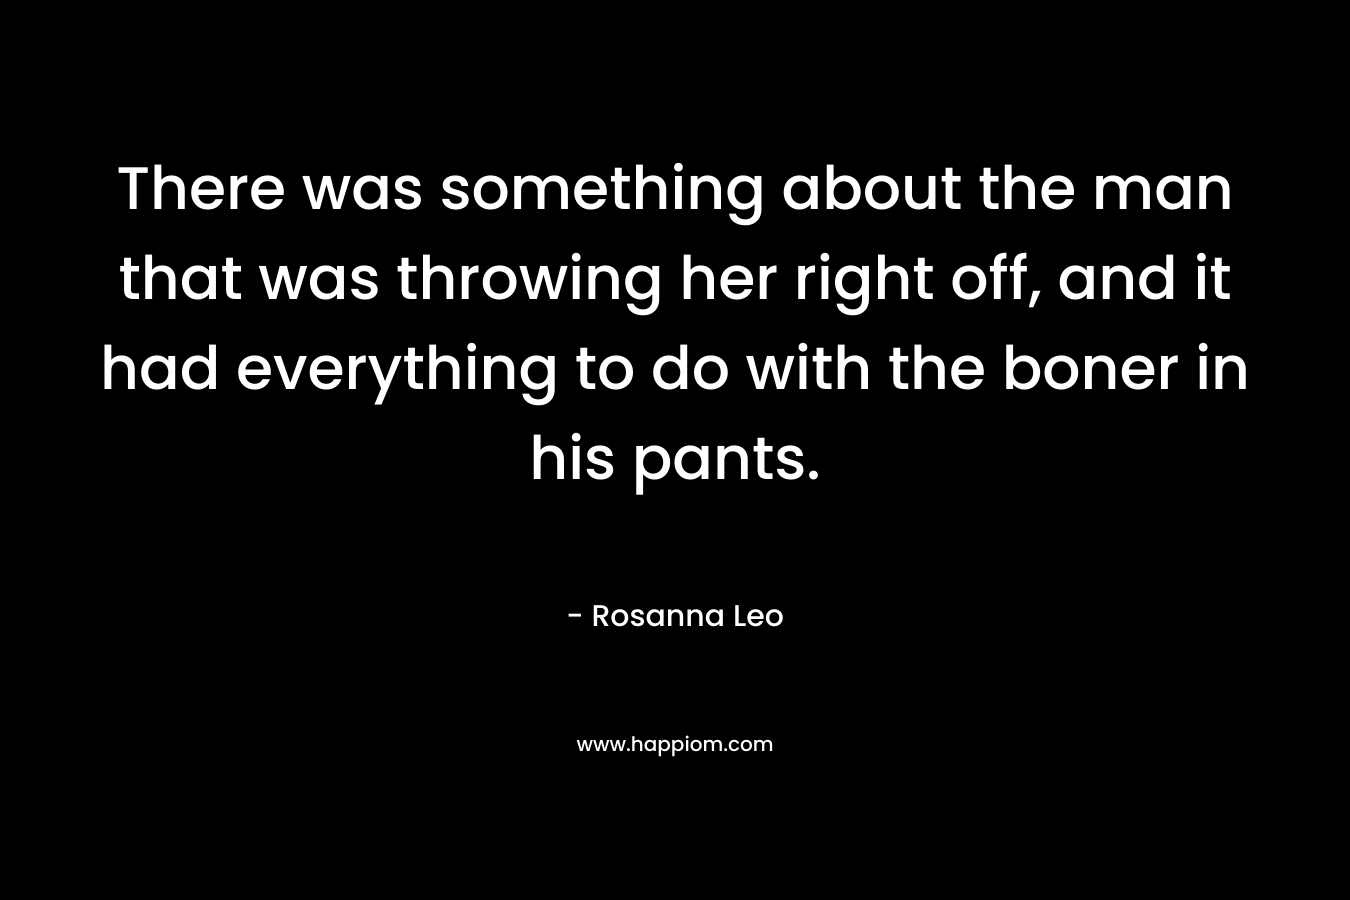 There was something about the man that was throwing her right off, and it had everything to do with the boner in his pants.